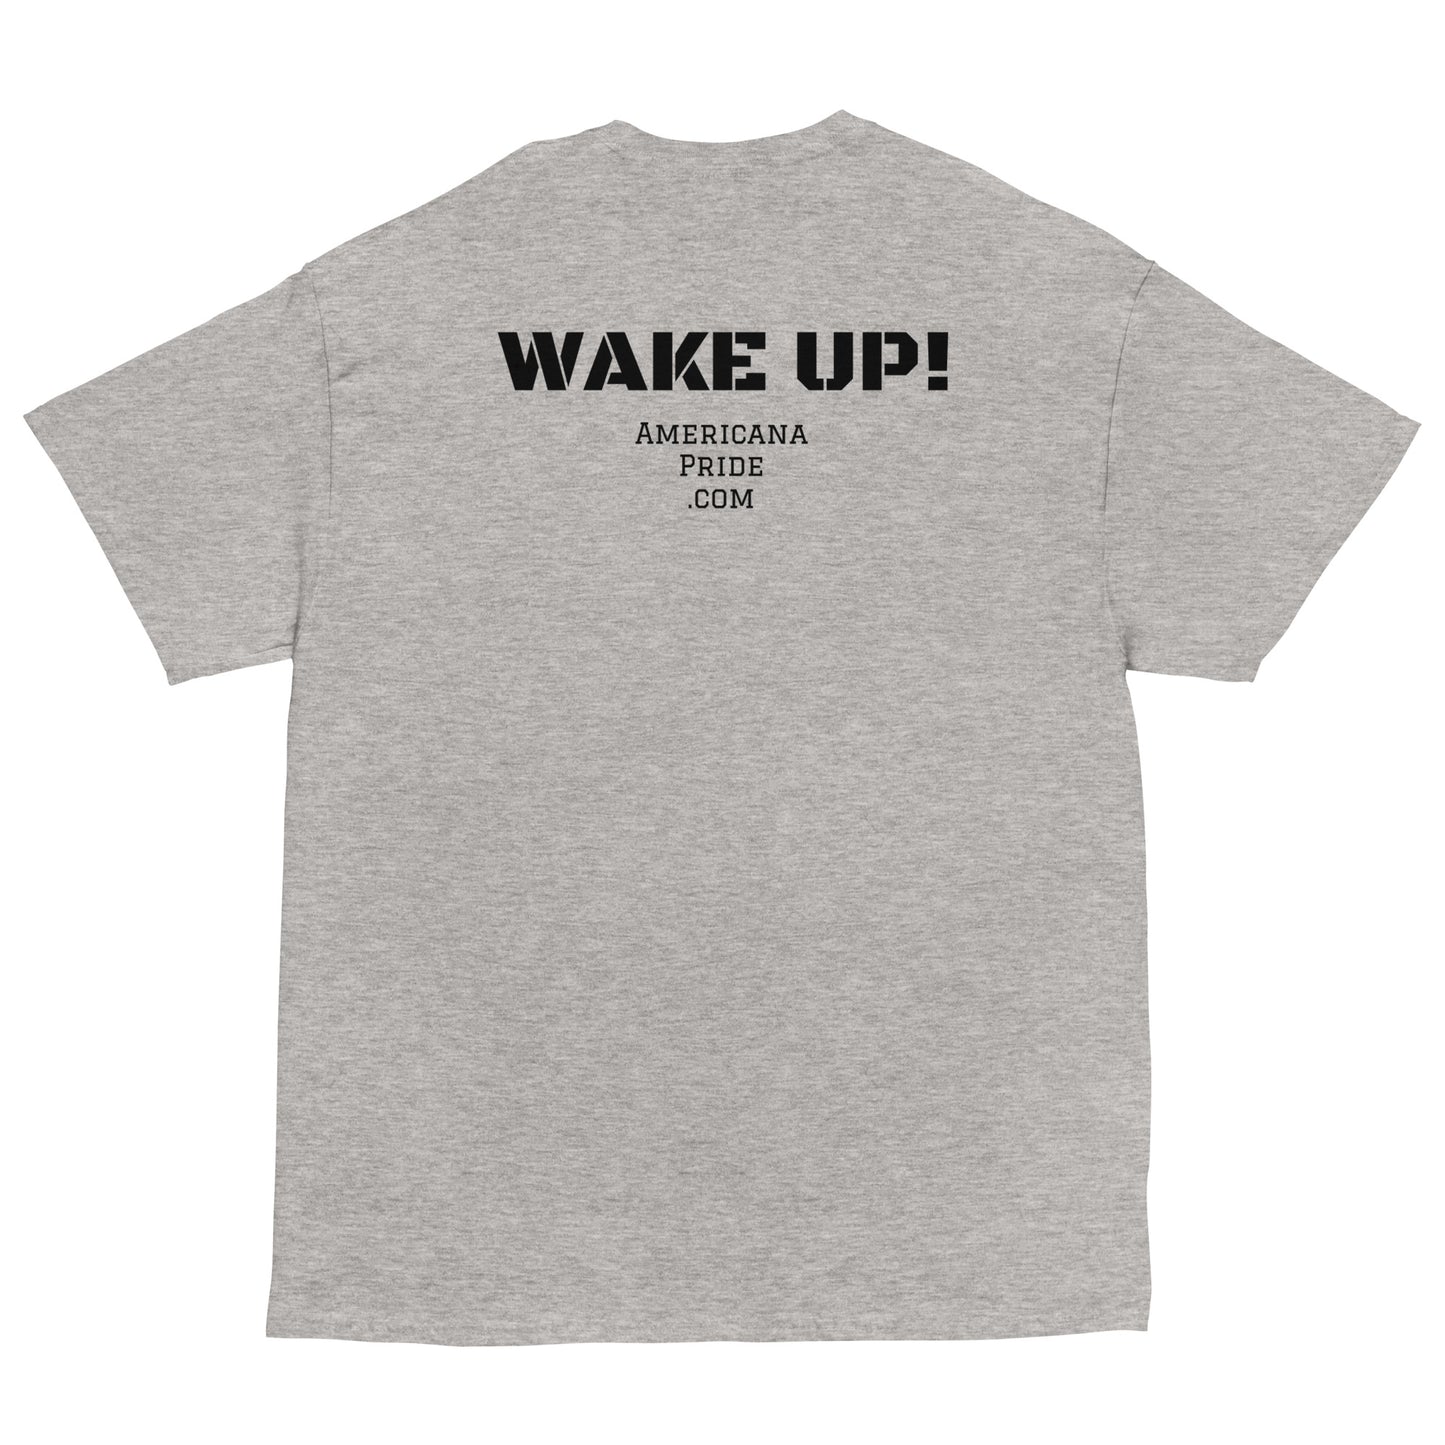 If you're not part of the movement you ARE the movement - Wake up! (Black lettering)